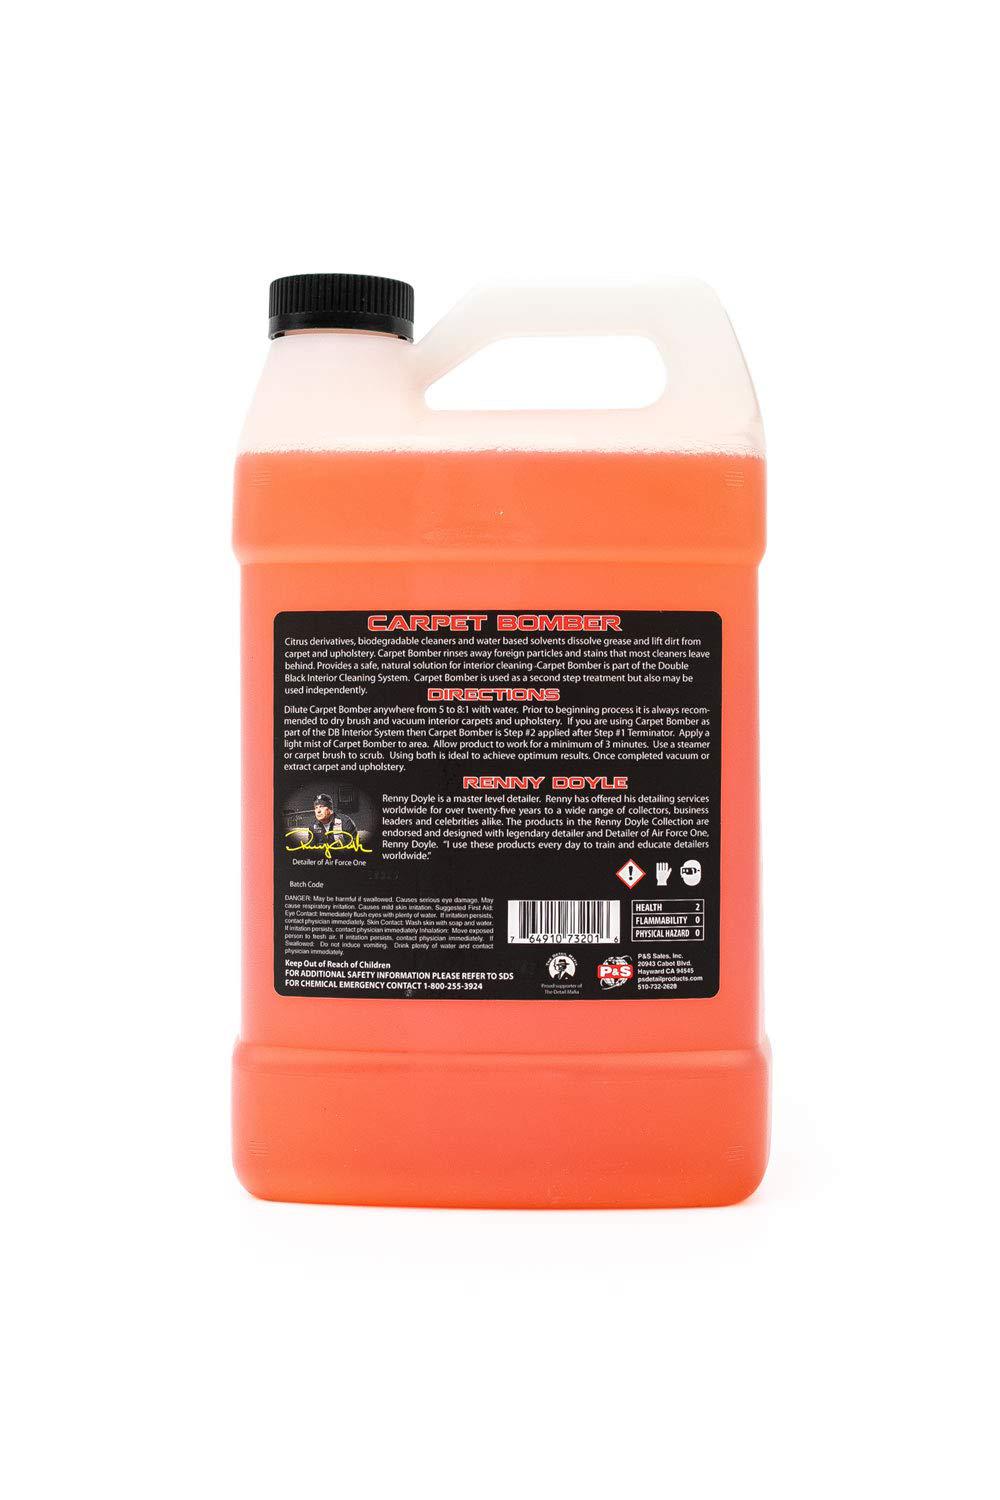 P & S PROFESSIONAL DETAIL PRODUCTS p&s professional detail products - carpet bomber - carpet and upholstery cleaner; citrus based cleaner dissolves grease and l